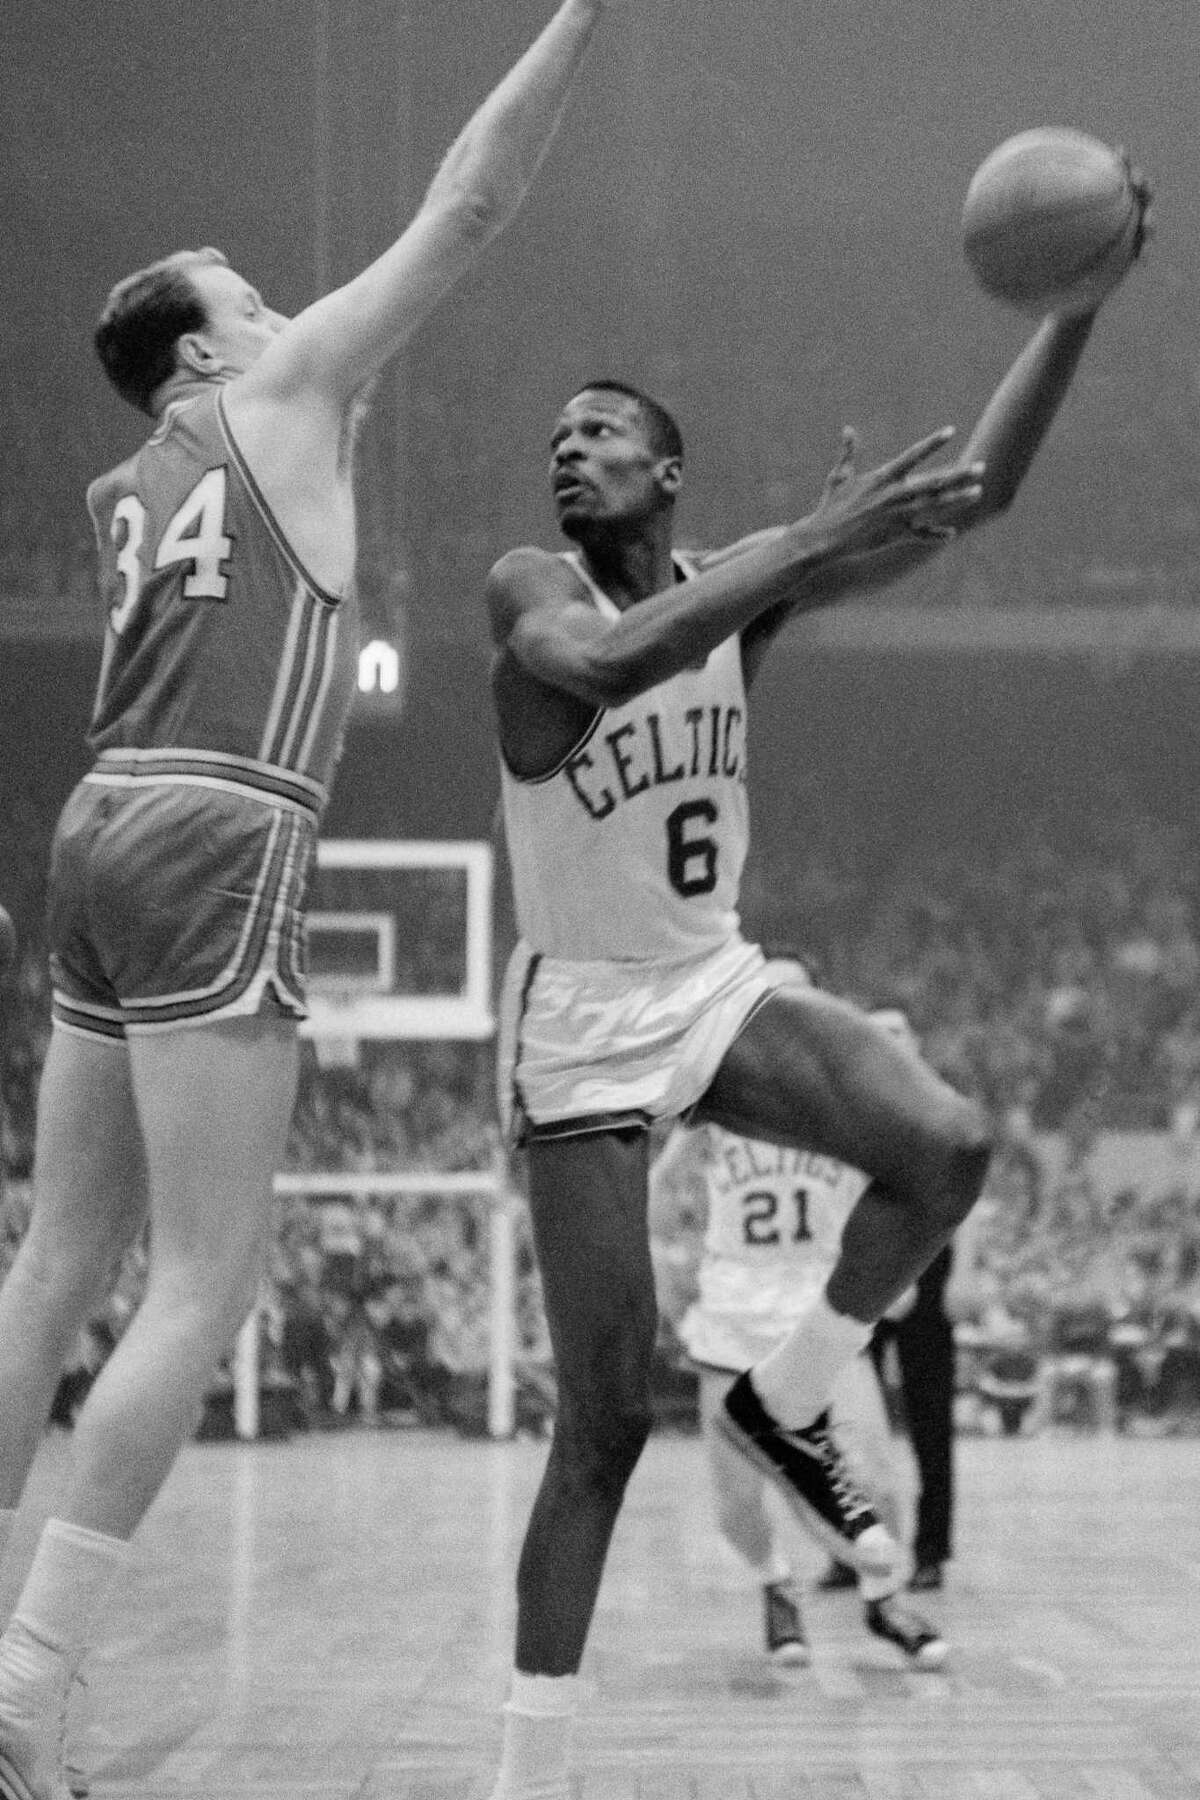 The Celtics’ Bill Russell attempts a hook shot in the championship final in 1960 against the St. Louis Hawks. He scored 35 points in Game 7 as Boston triumphed 122-103 for their 3rd title.